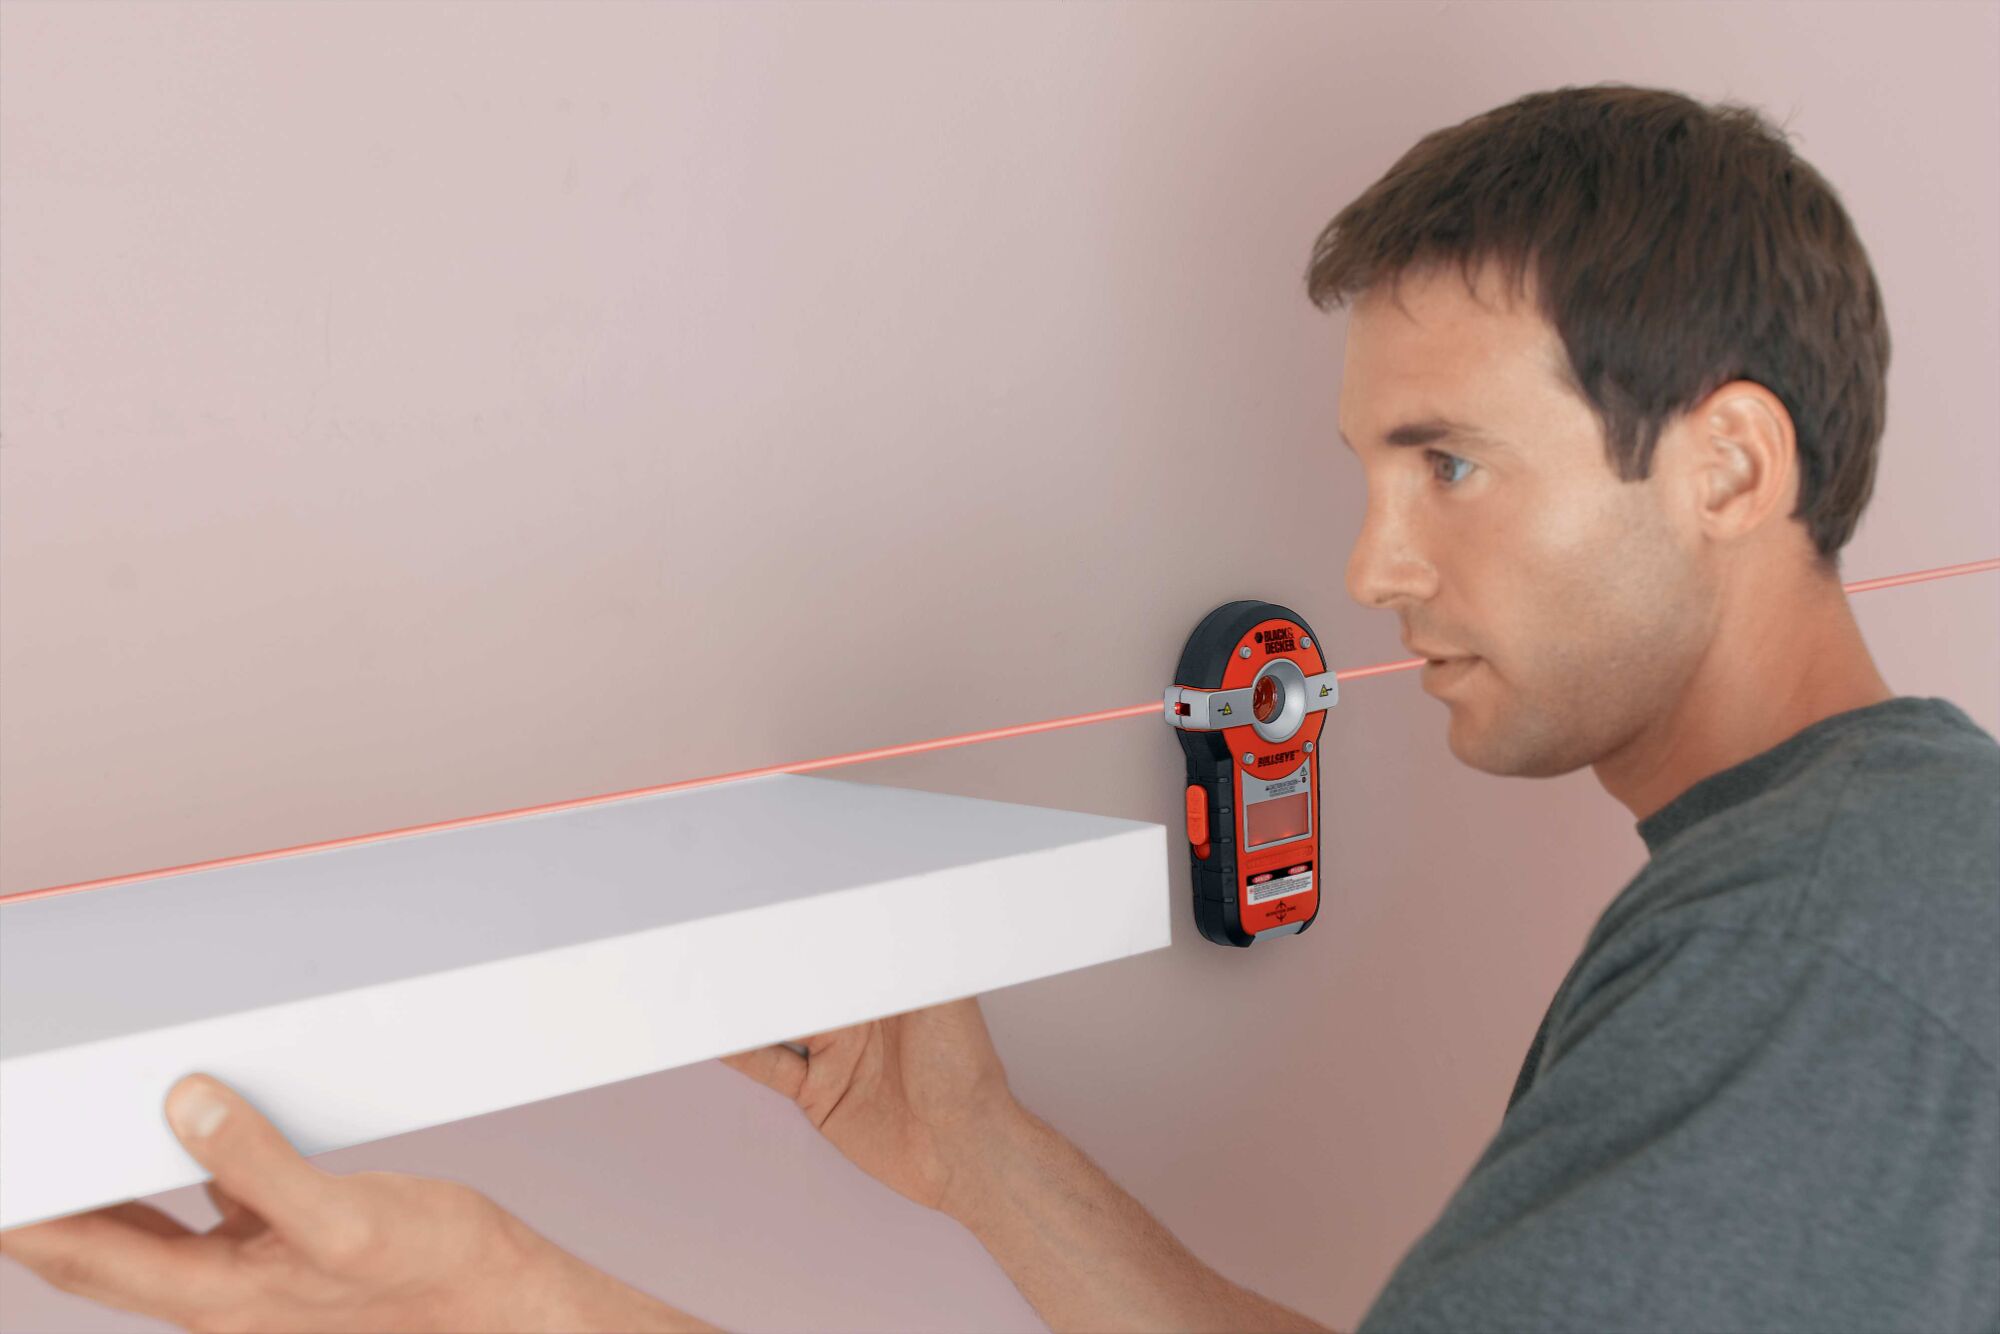 BullsEye auto leveling laser with stud sensor being used by a person to install a shelf.